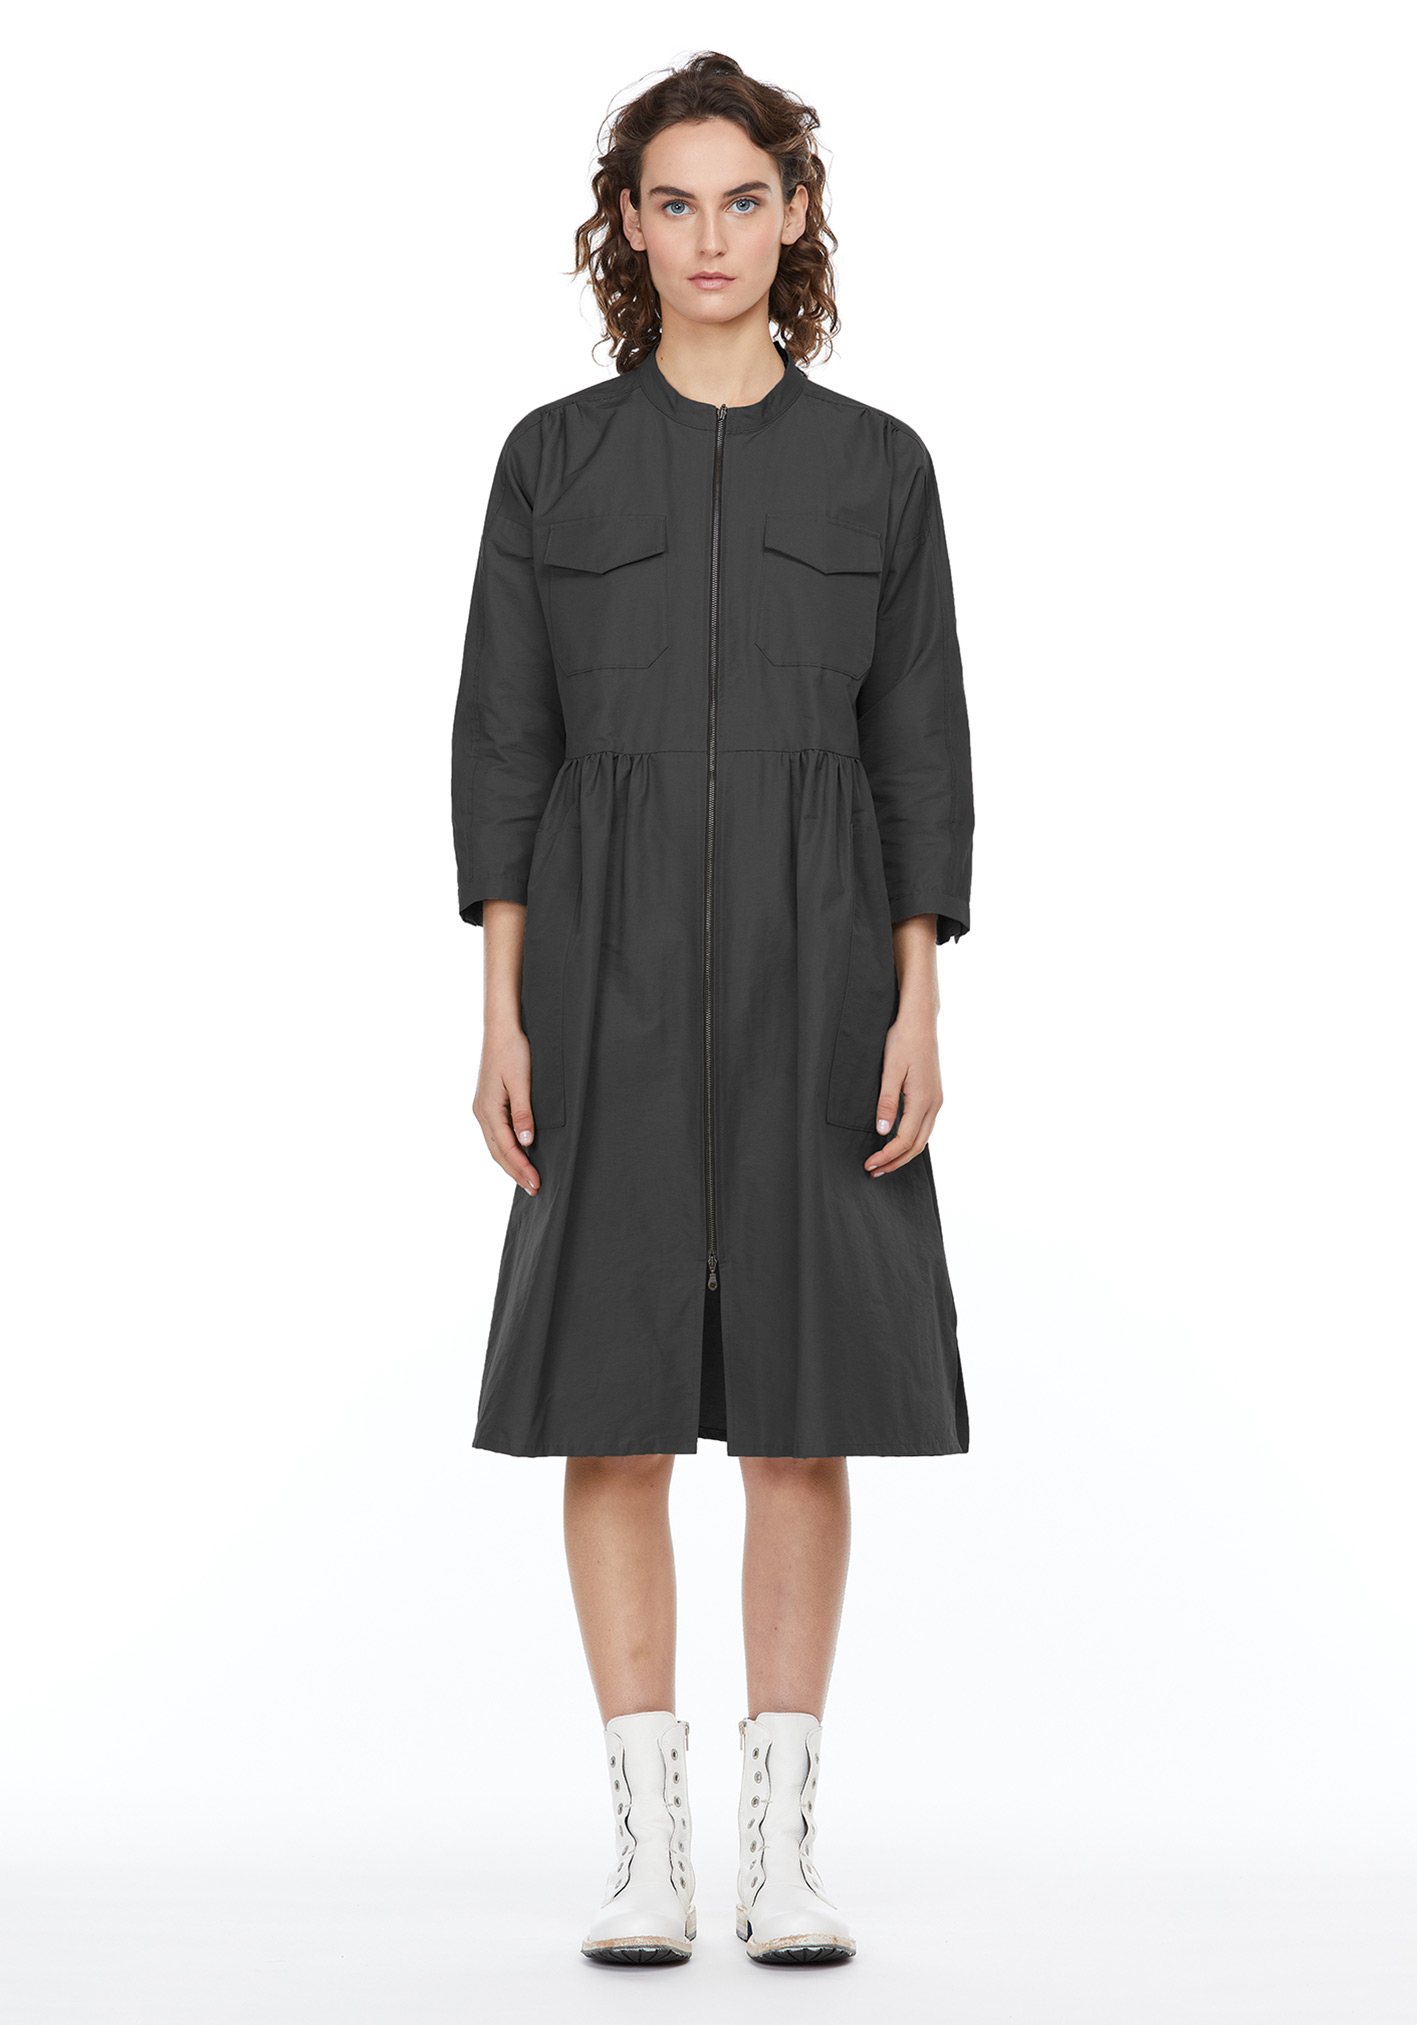 buy the latest Ally Utility Dress online